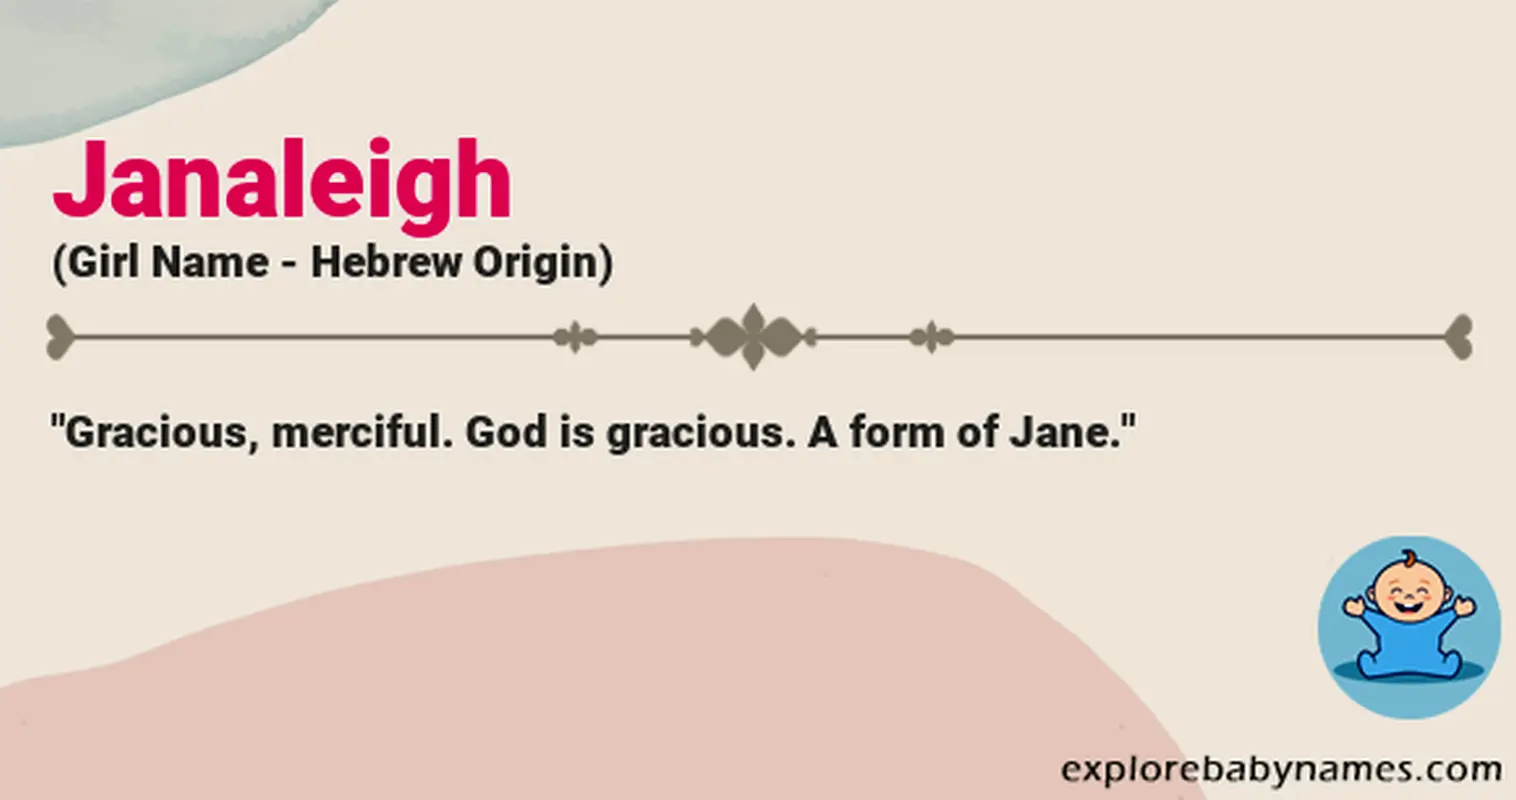 Meaning of Janaleigh